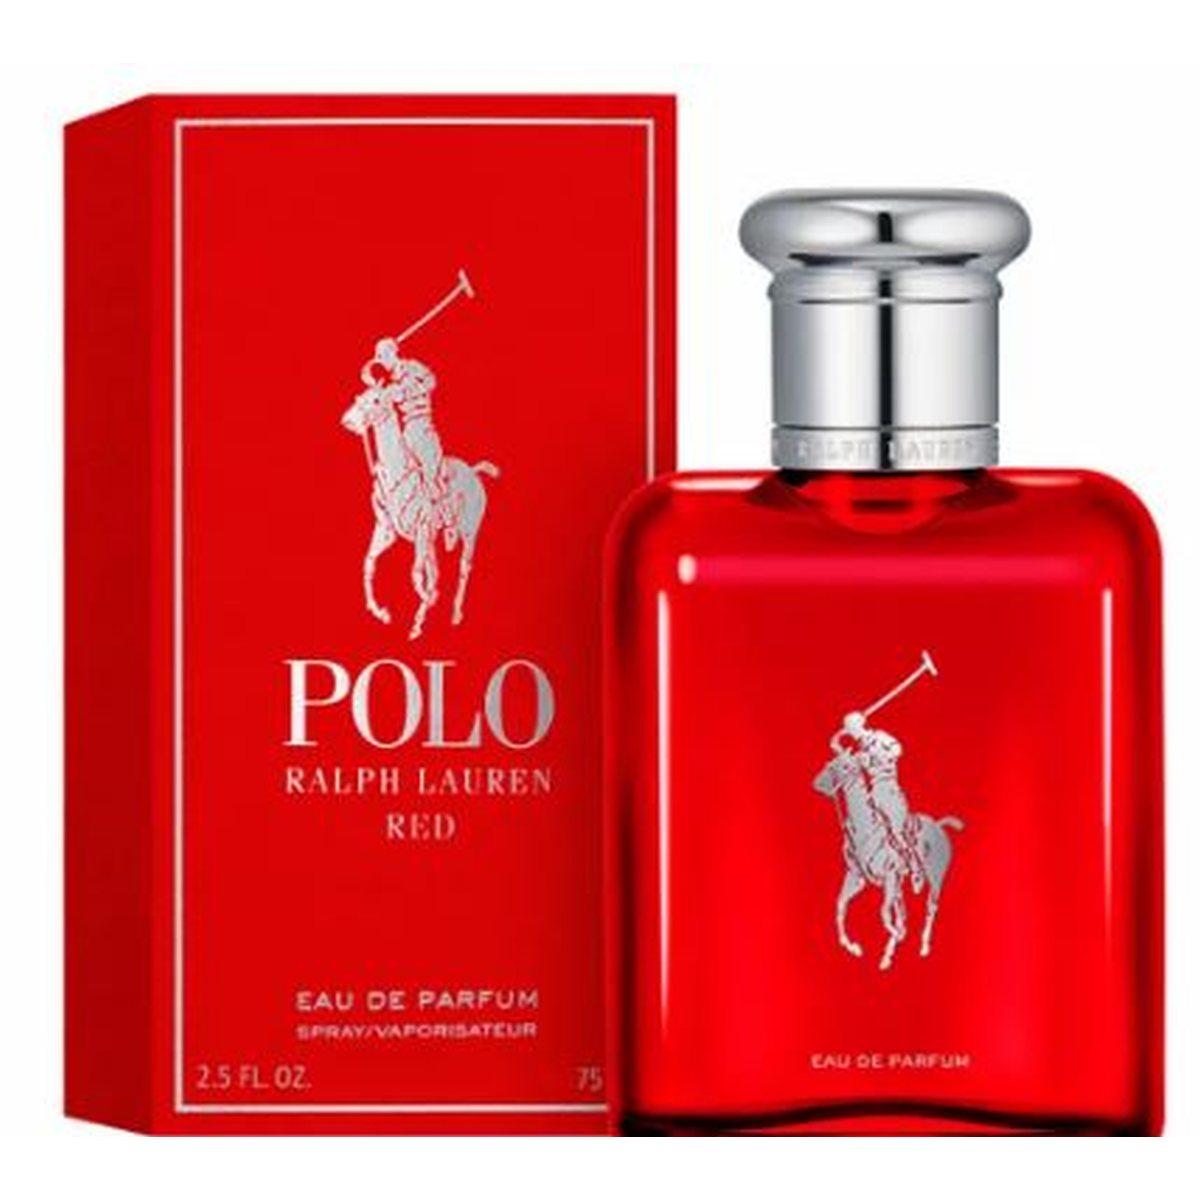 Polo Red 75 ml